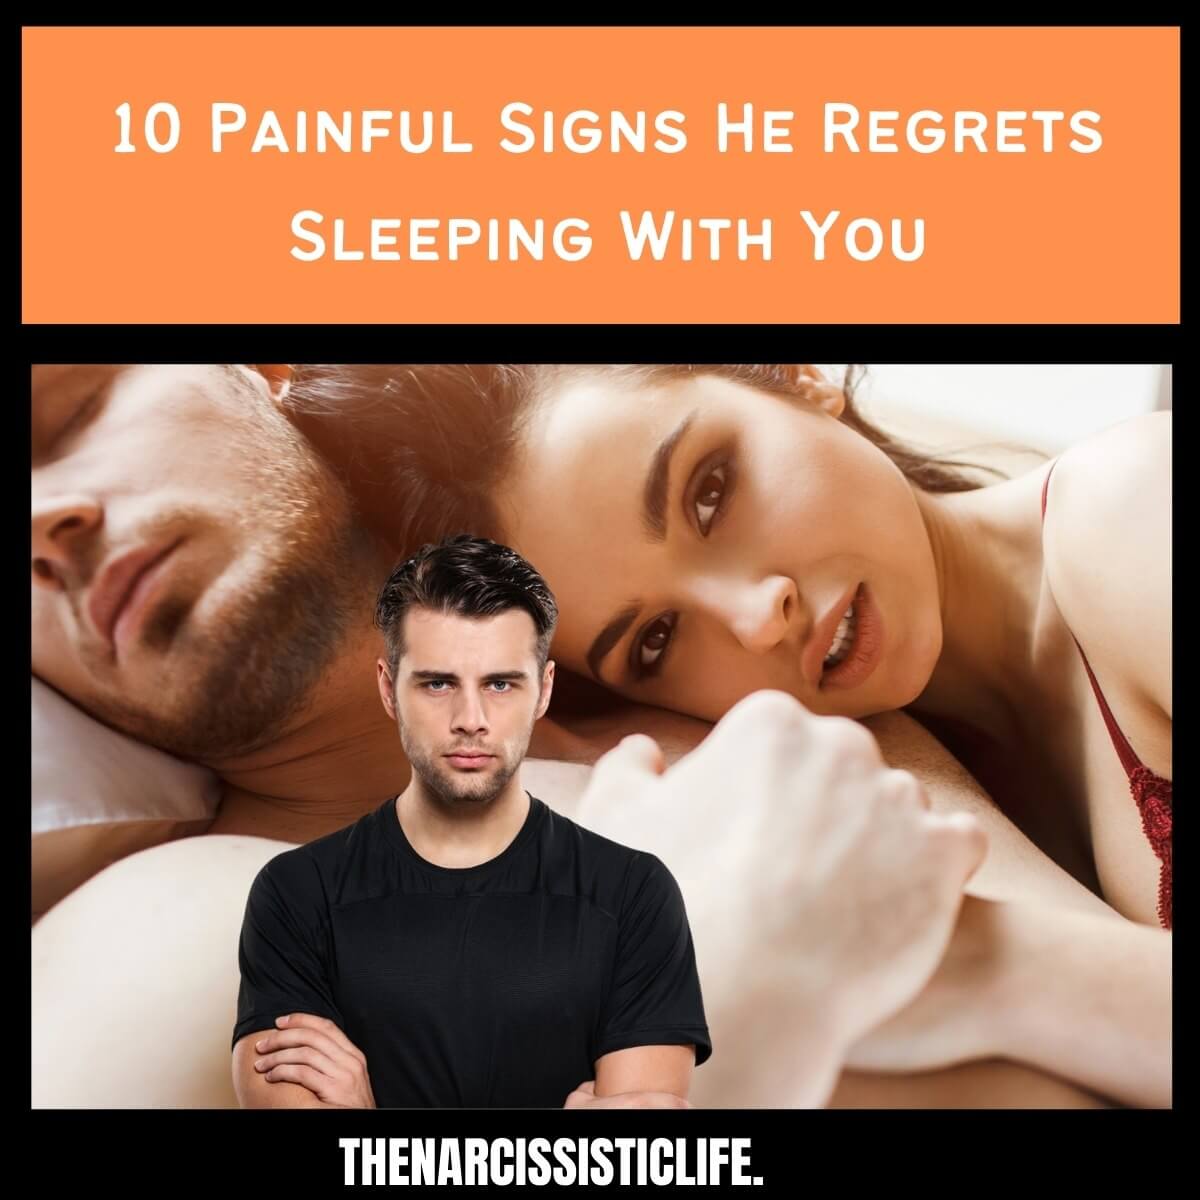 10 Painful Signs He Regrets Sleeping With You